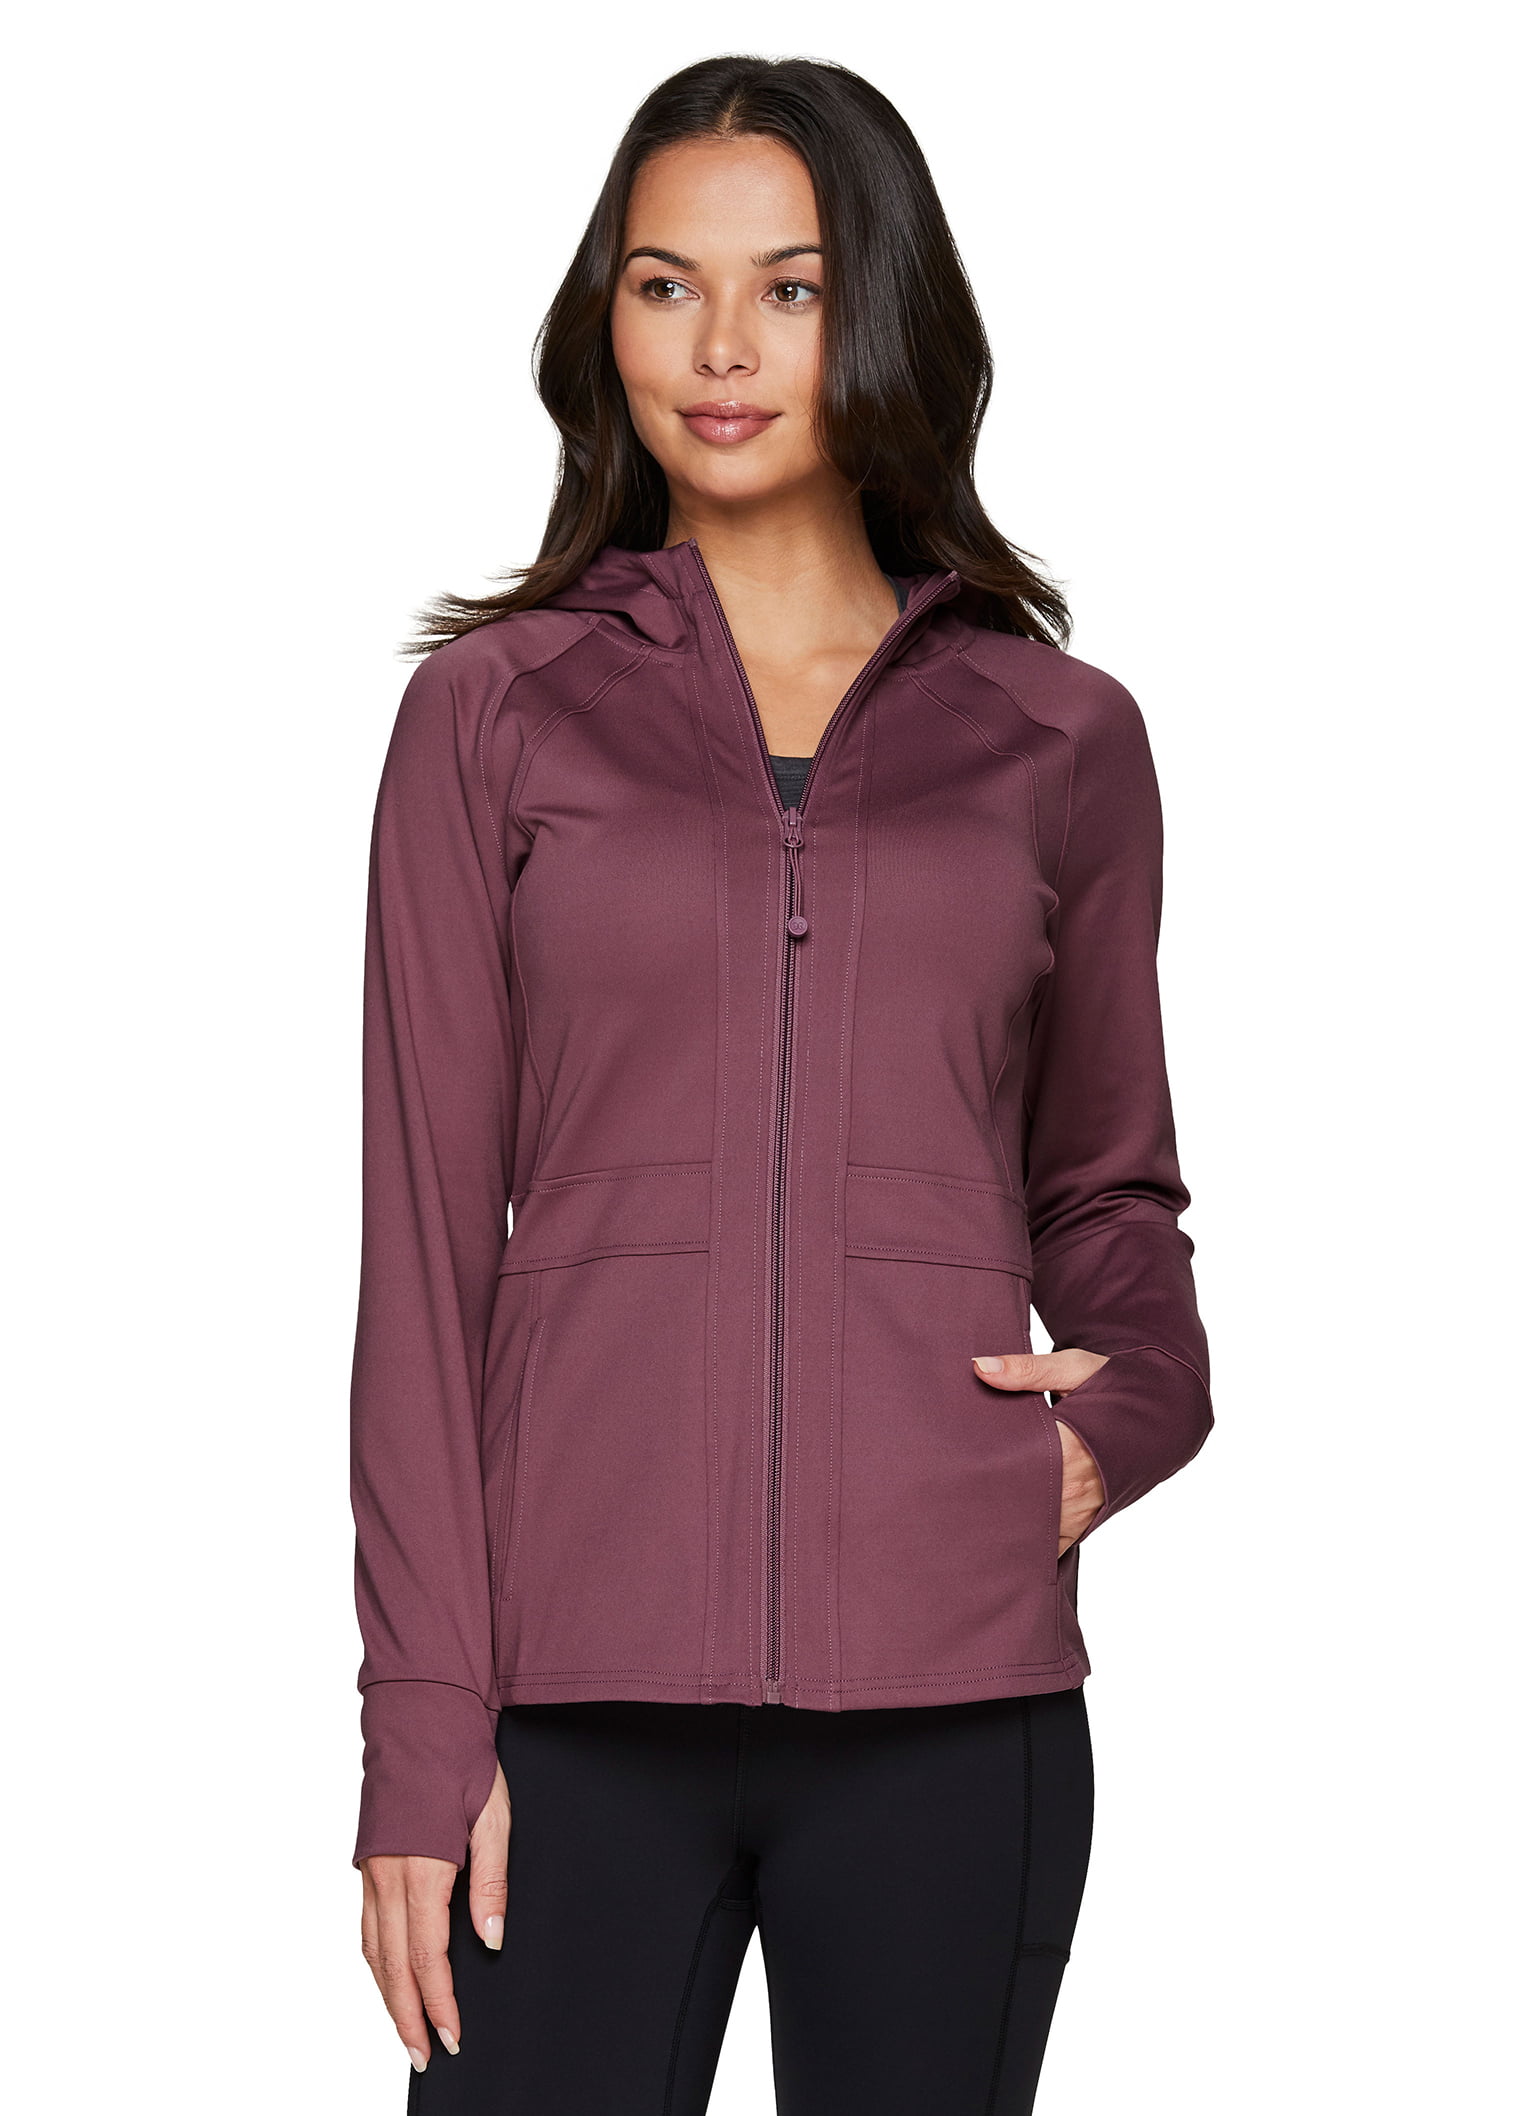 RBX Active Women's Athletic Breathable Lightweight Zip Up Running Jacket with Pockets 